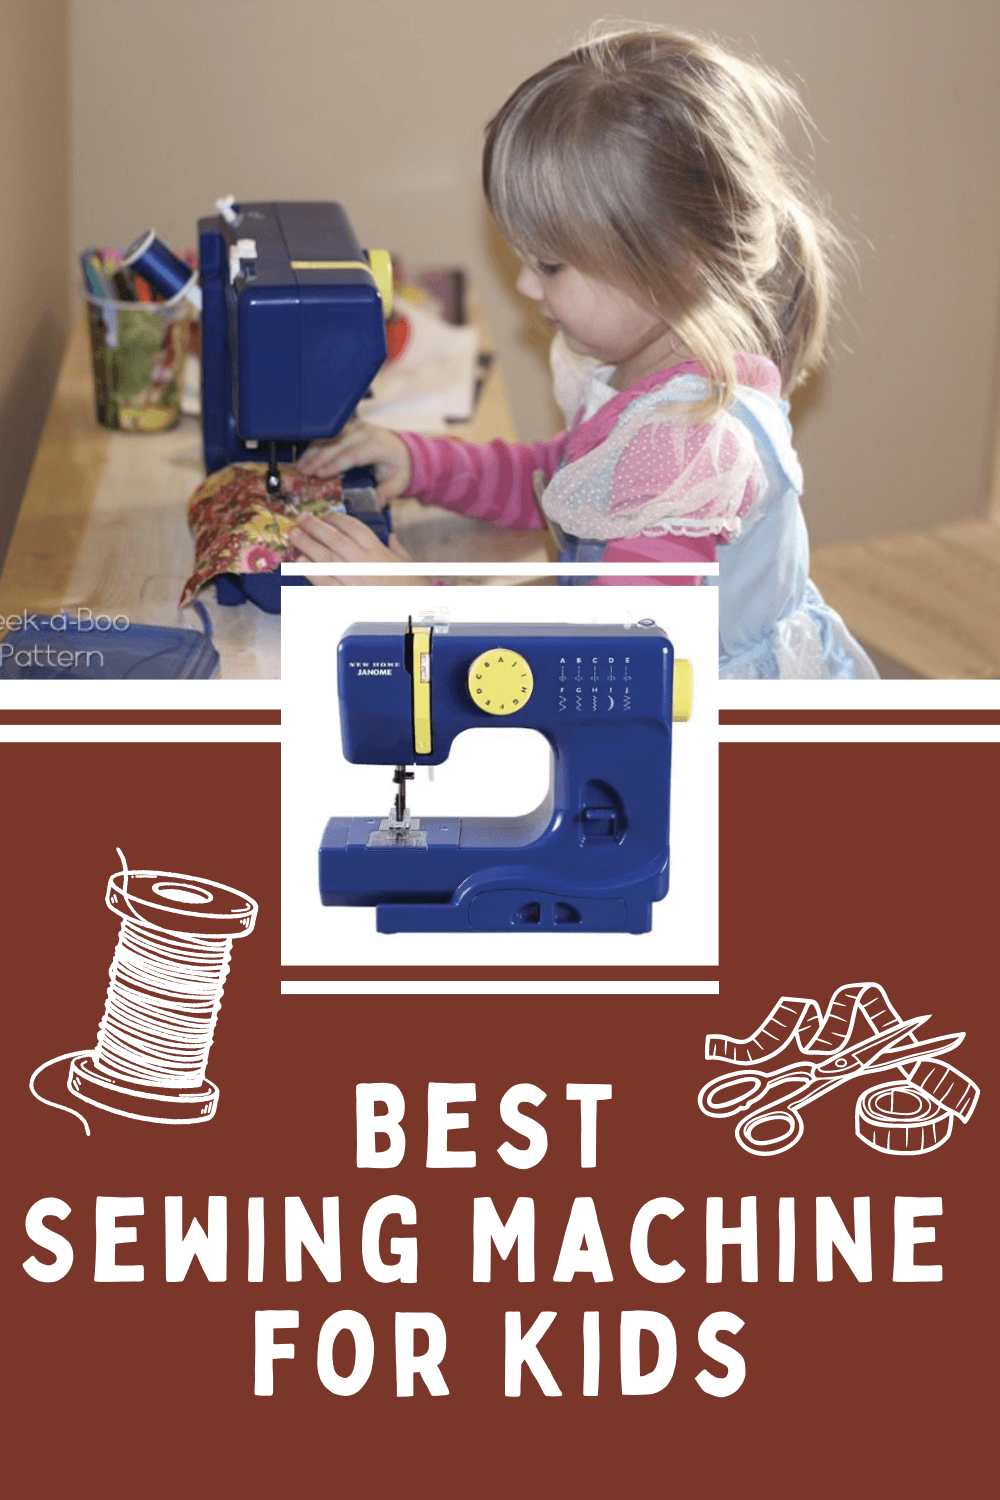 The Best Toy Sewing Machine? Sew Cool Sewing Machine